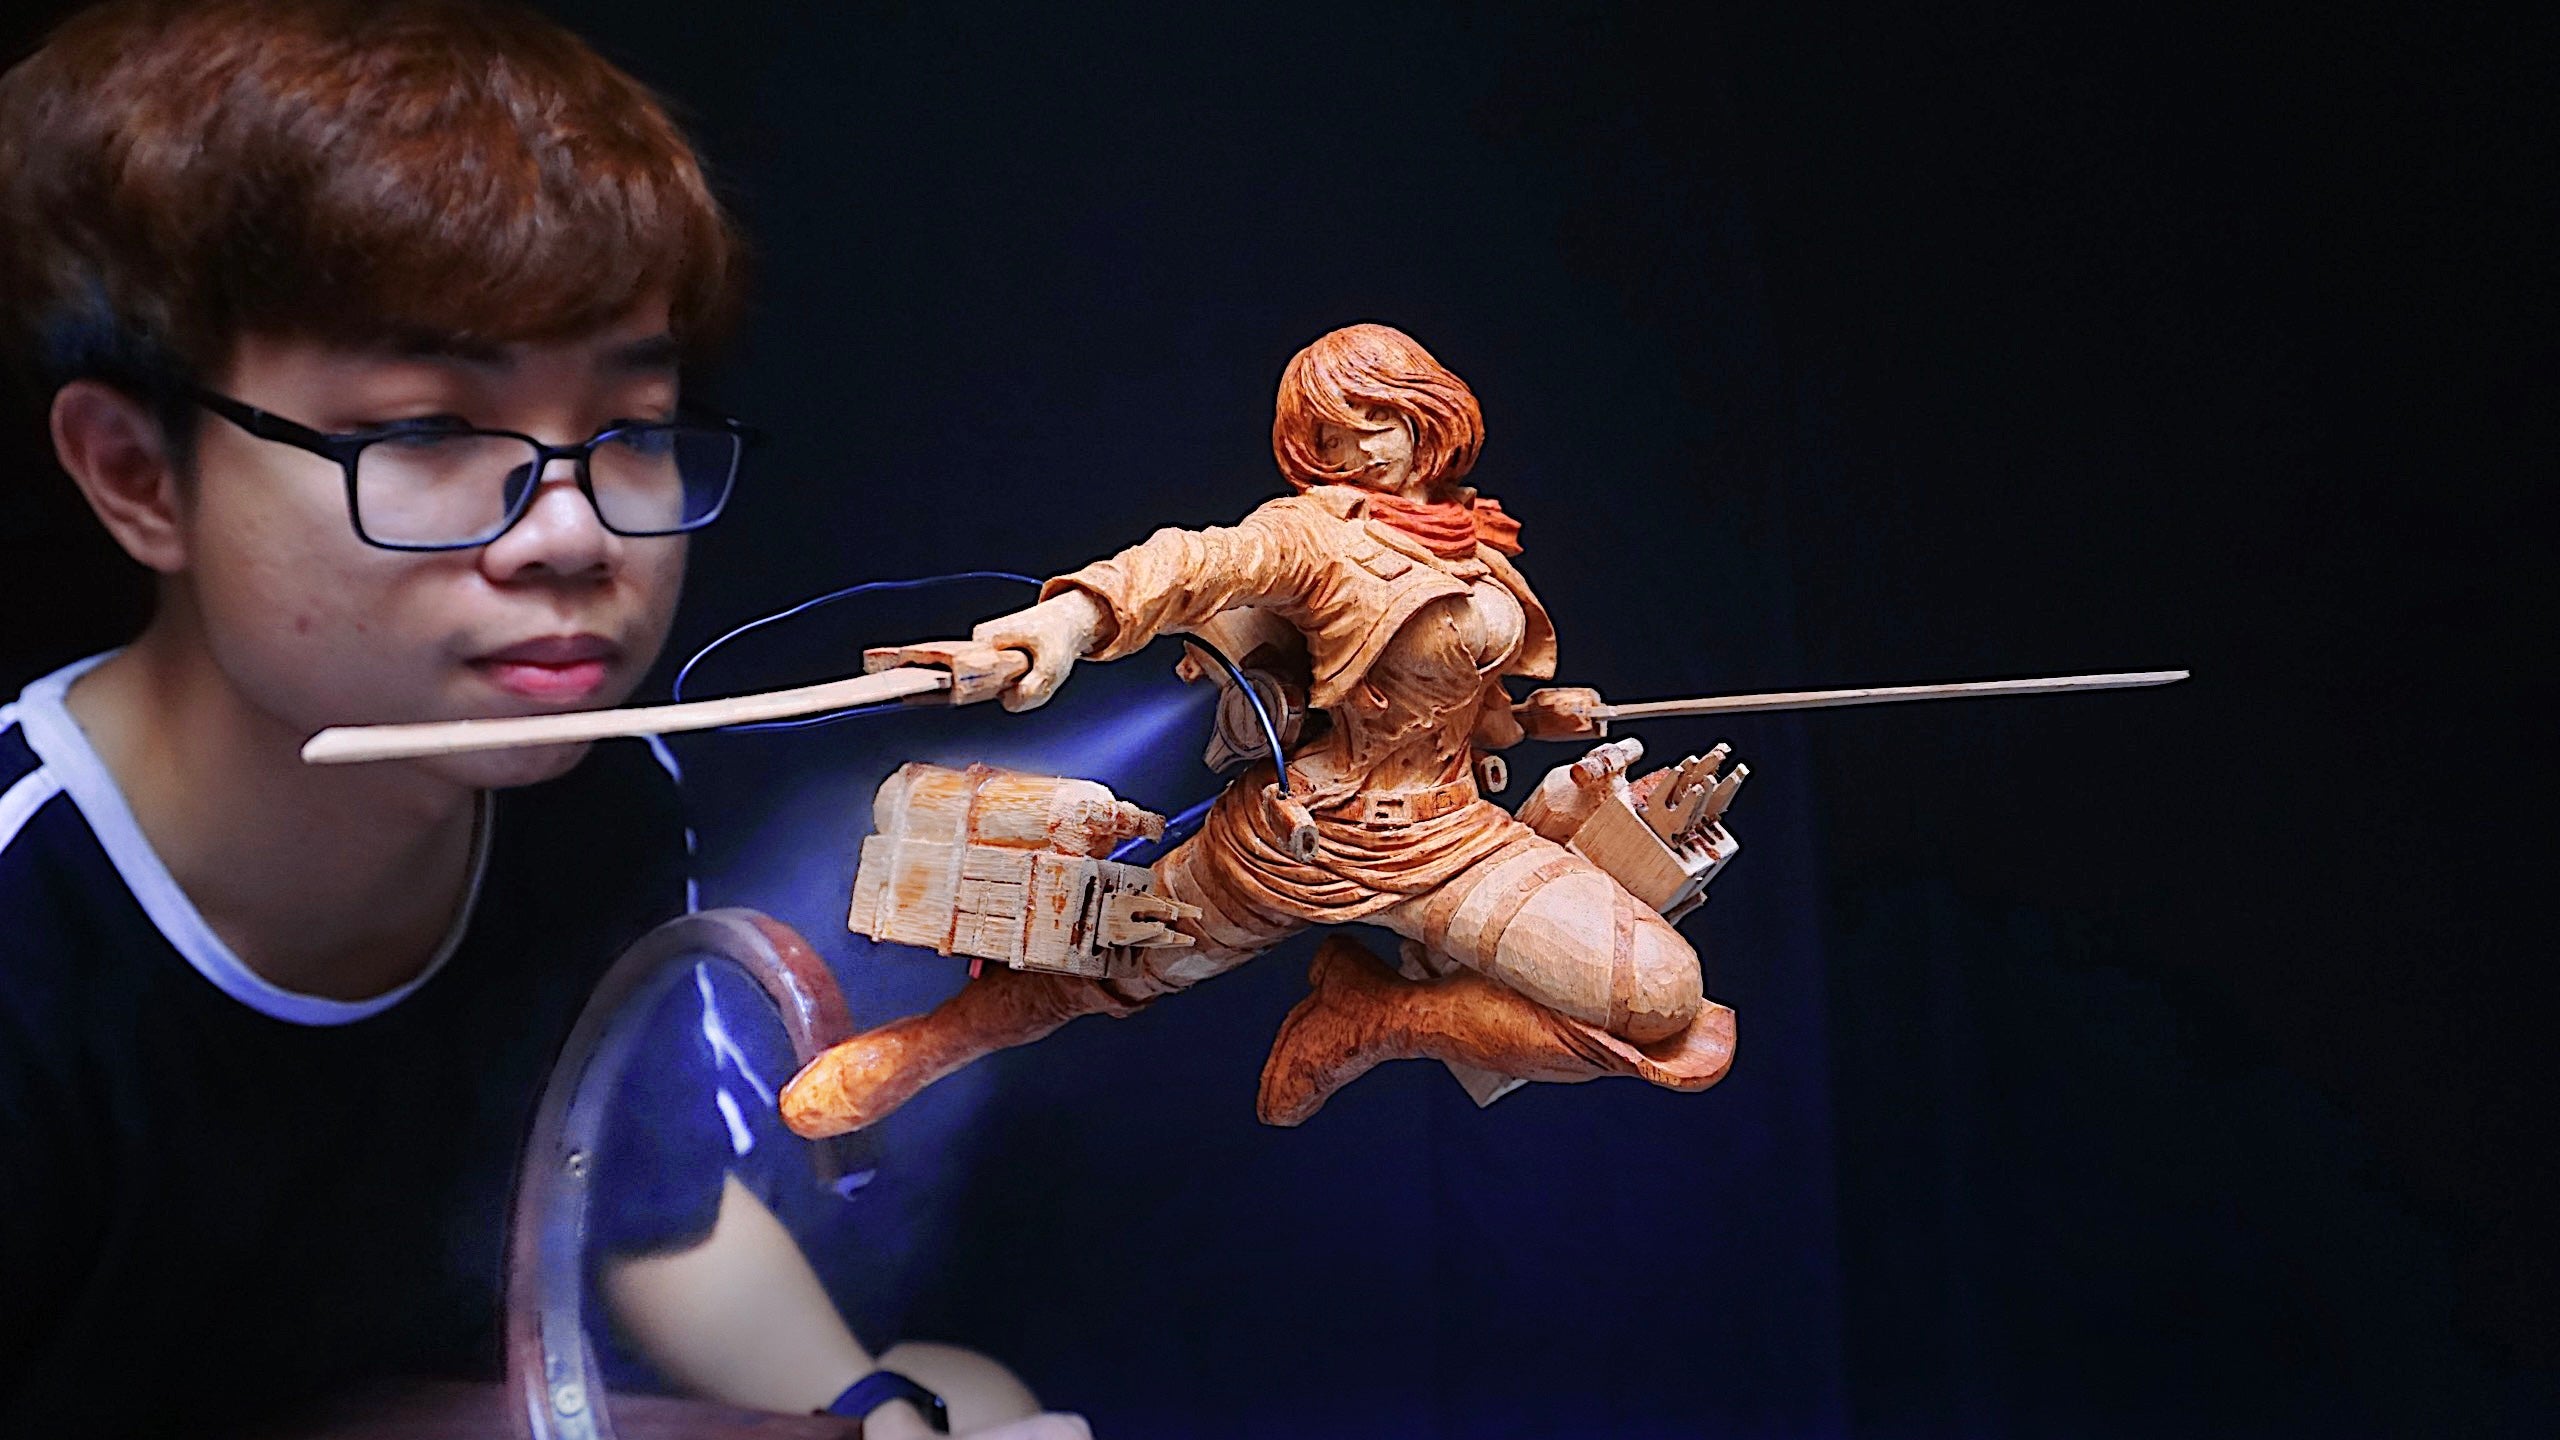 Mikasa Figure Wood carving - Flying with 3D Maneuver Gear - Attack on Titan - Woodart Vietnam 